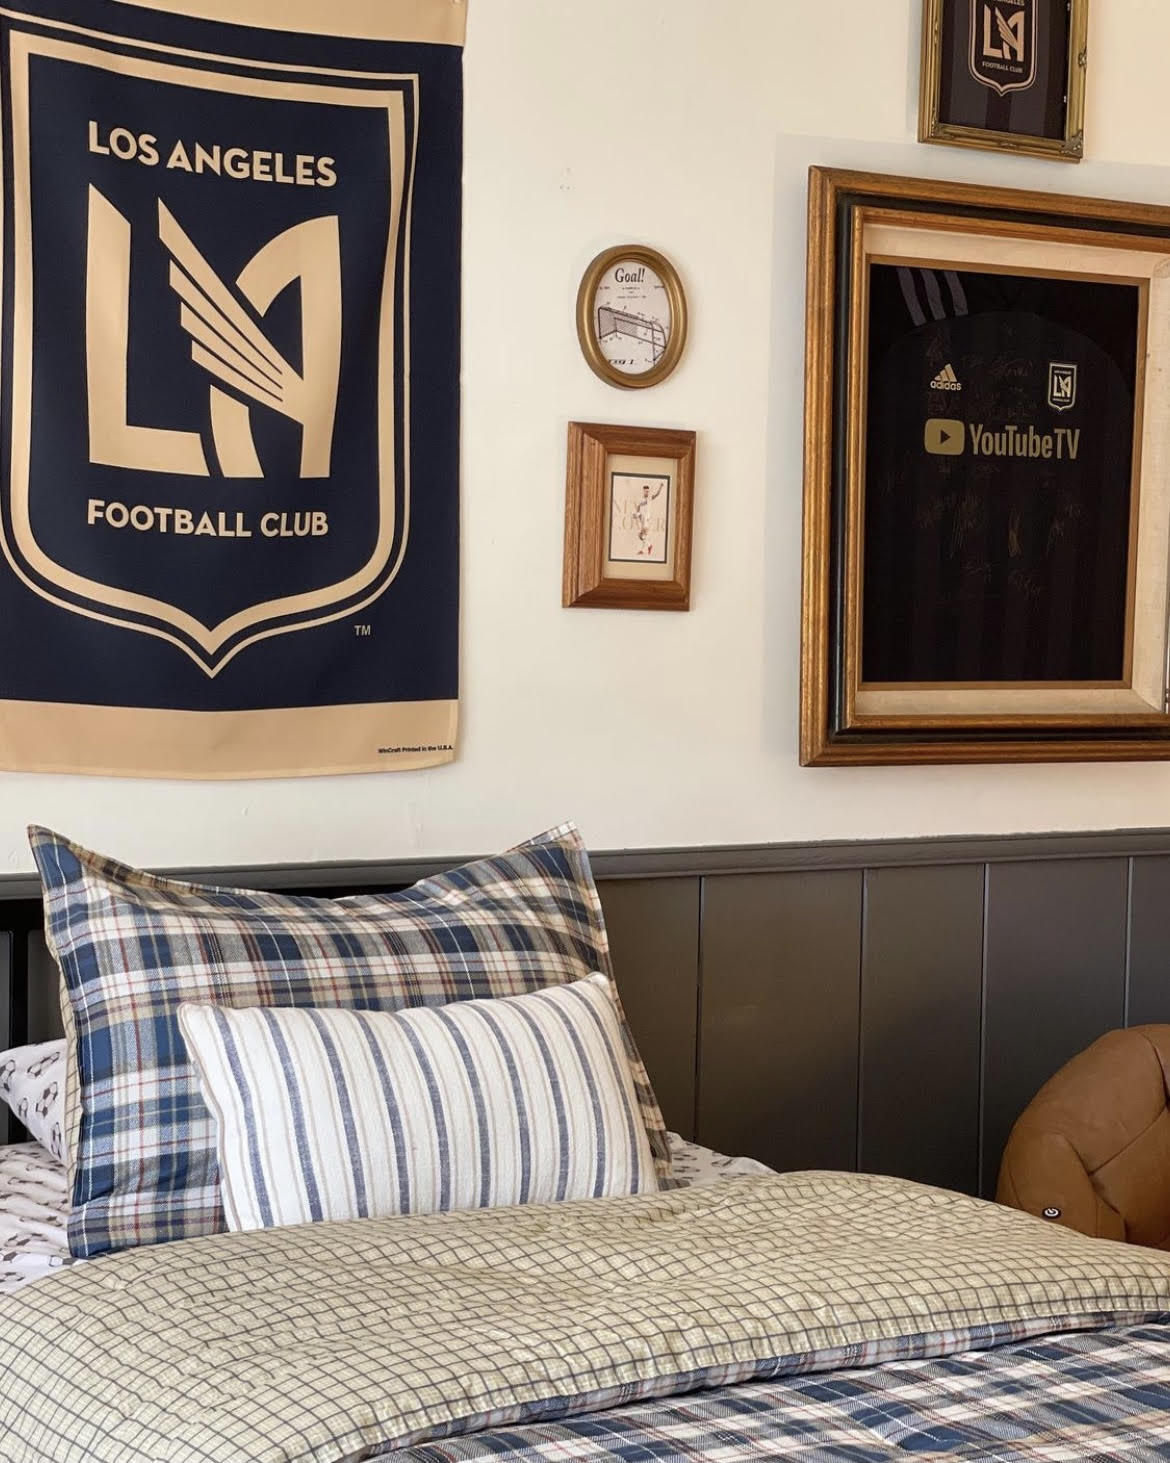 Boys soccer room, kids soccer themed room, kendall charcoal benjamin moore, dark gray paint, black paint, shiplap walls, dunn edwards swiss coffee paint, built in closets, window in middle of closet, wooden woven shades, interior dormer window, vintage rug, laminate floors, plaid bedding, LAFC themed room, modern traditional kids room, shiplap wainscotting, camp themed room, framed jersey, framed t shirt, LAFC themed room